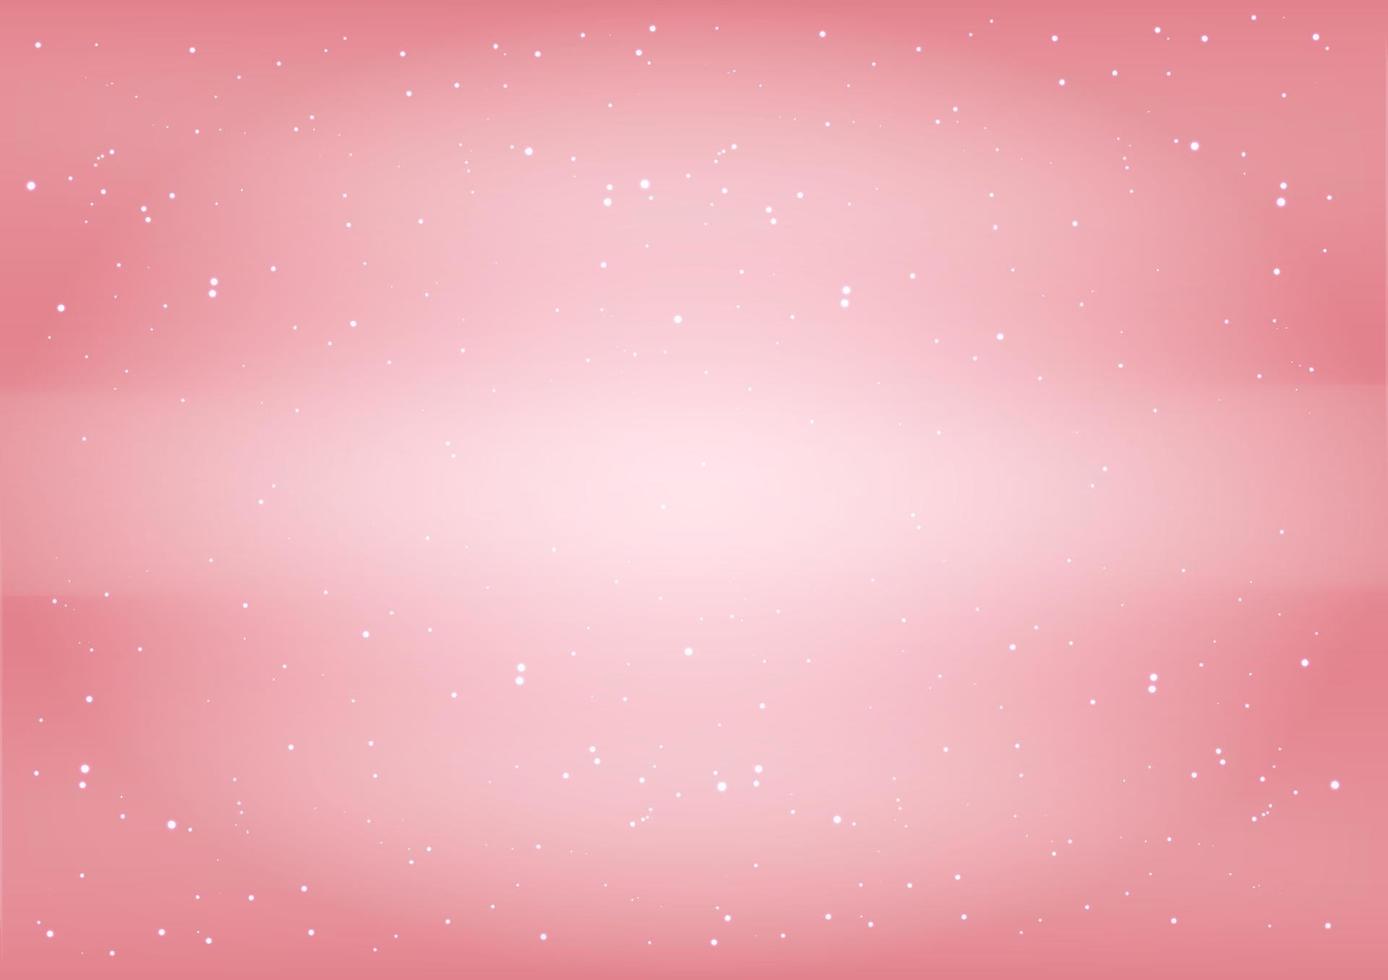 Pink background with glitter, vector illustration.